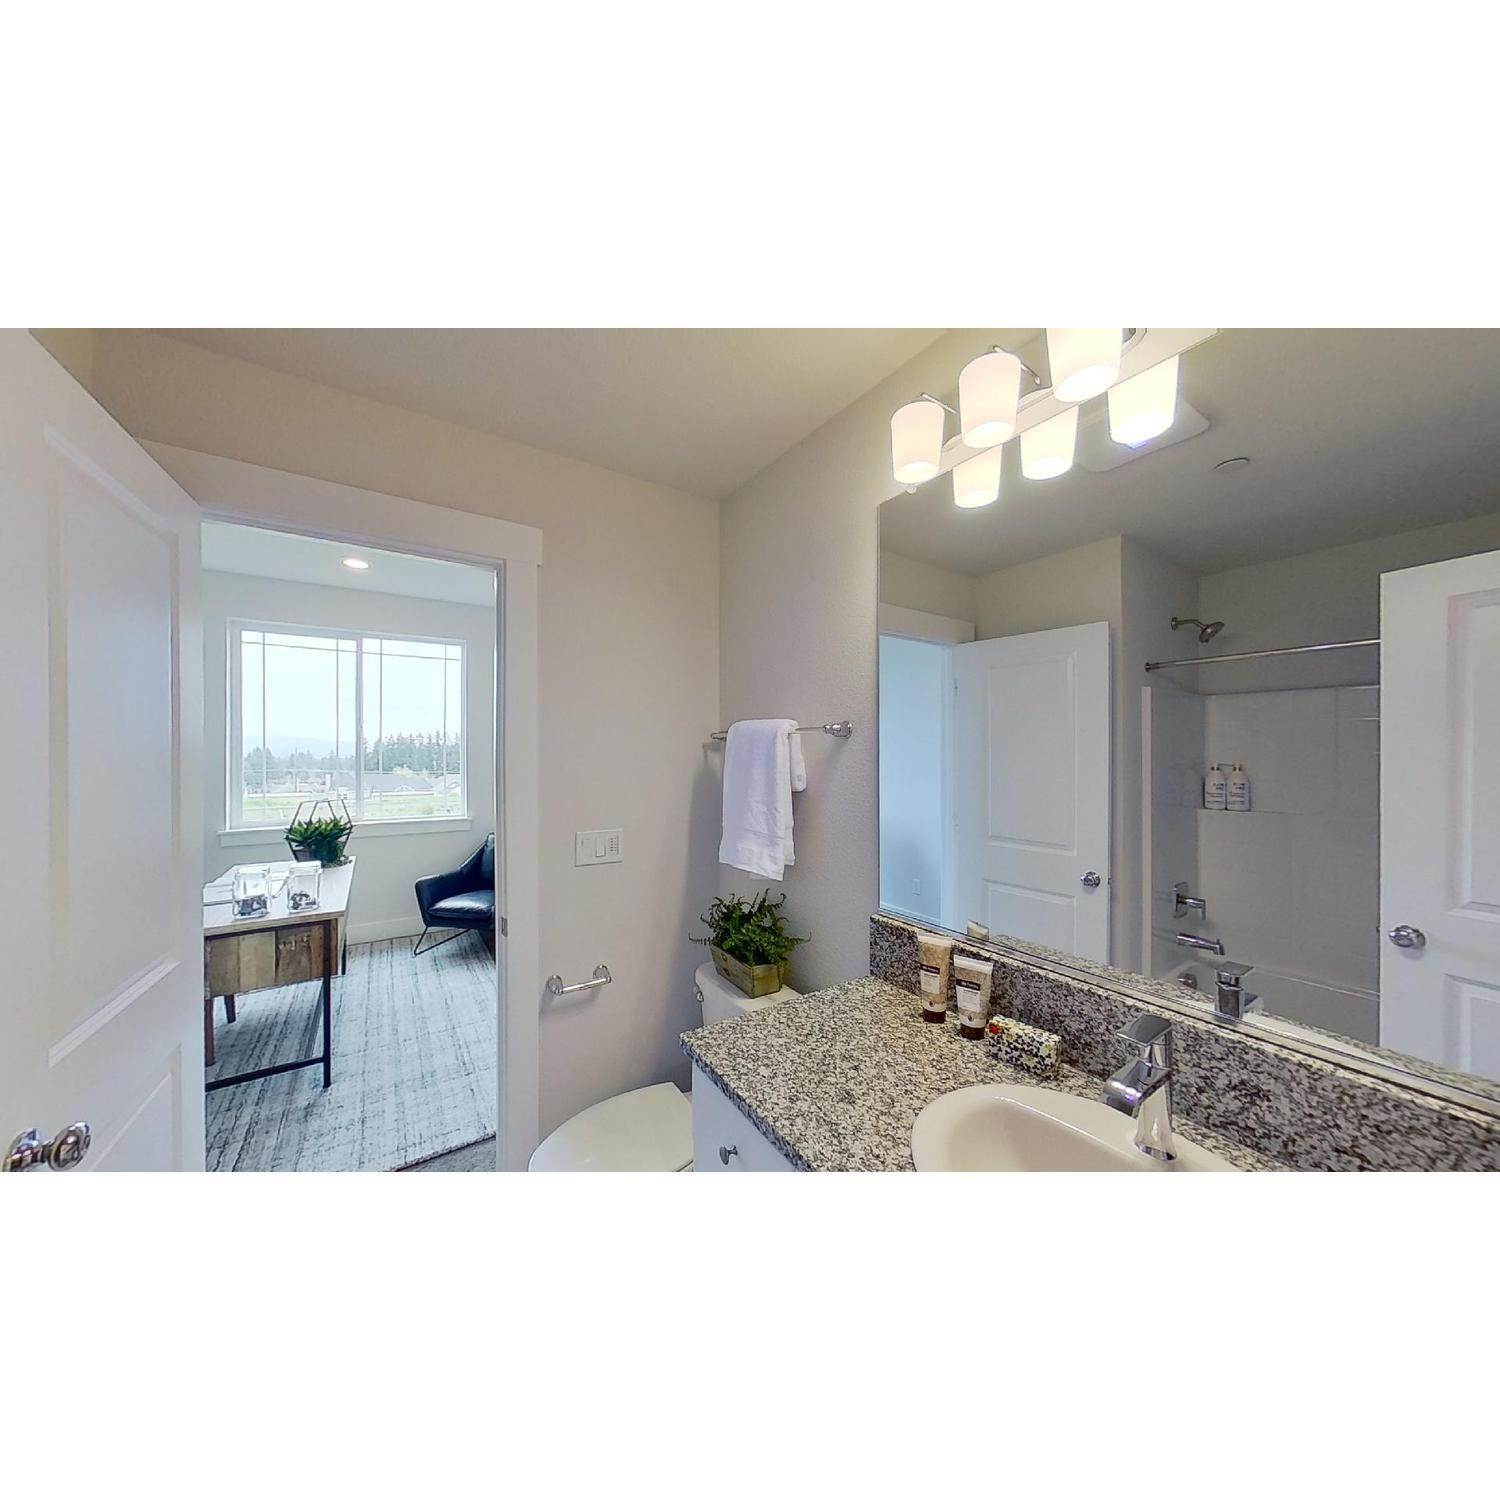 3. 16786 SW Leaf Lane, Tigard, OR 97224에 South River Terrace Innovate Condominiums 건물